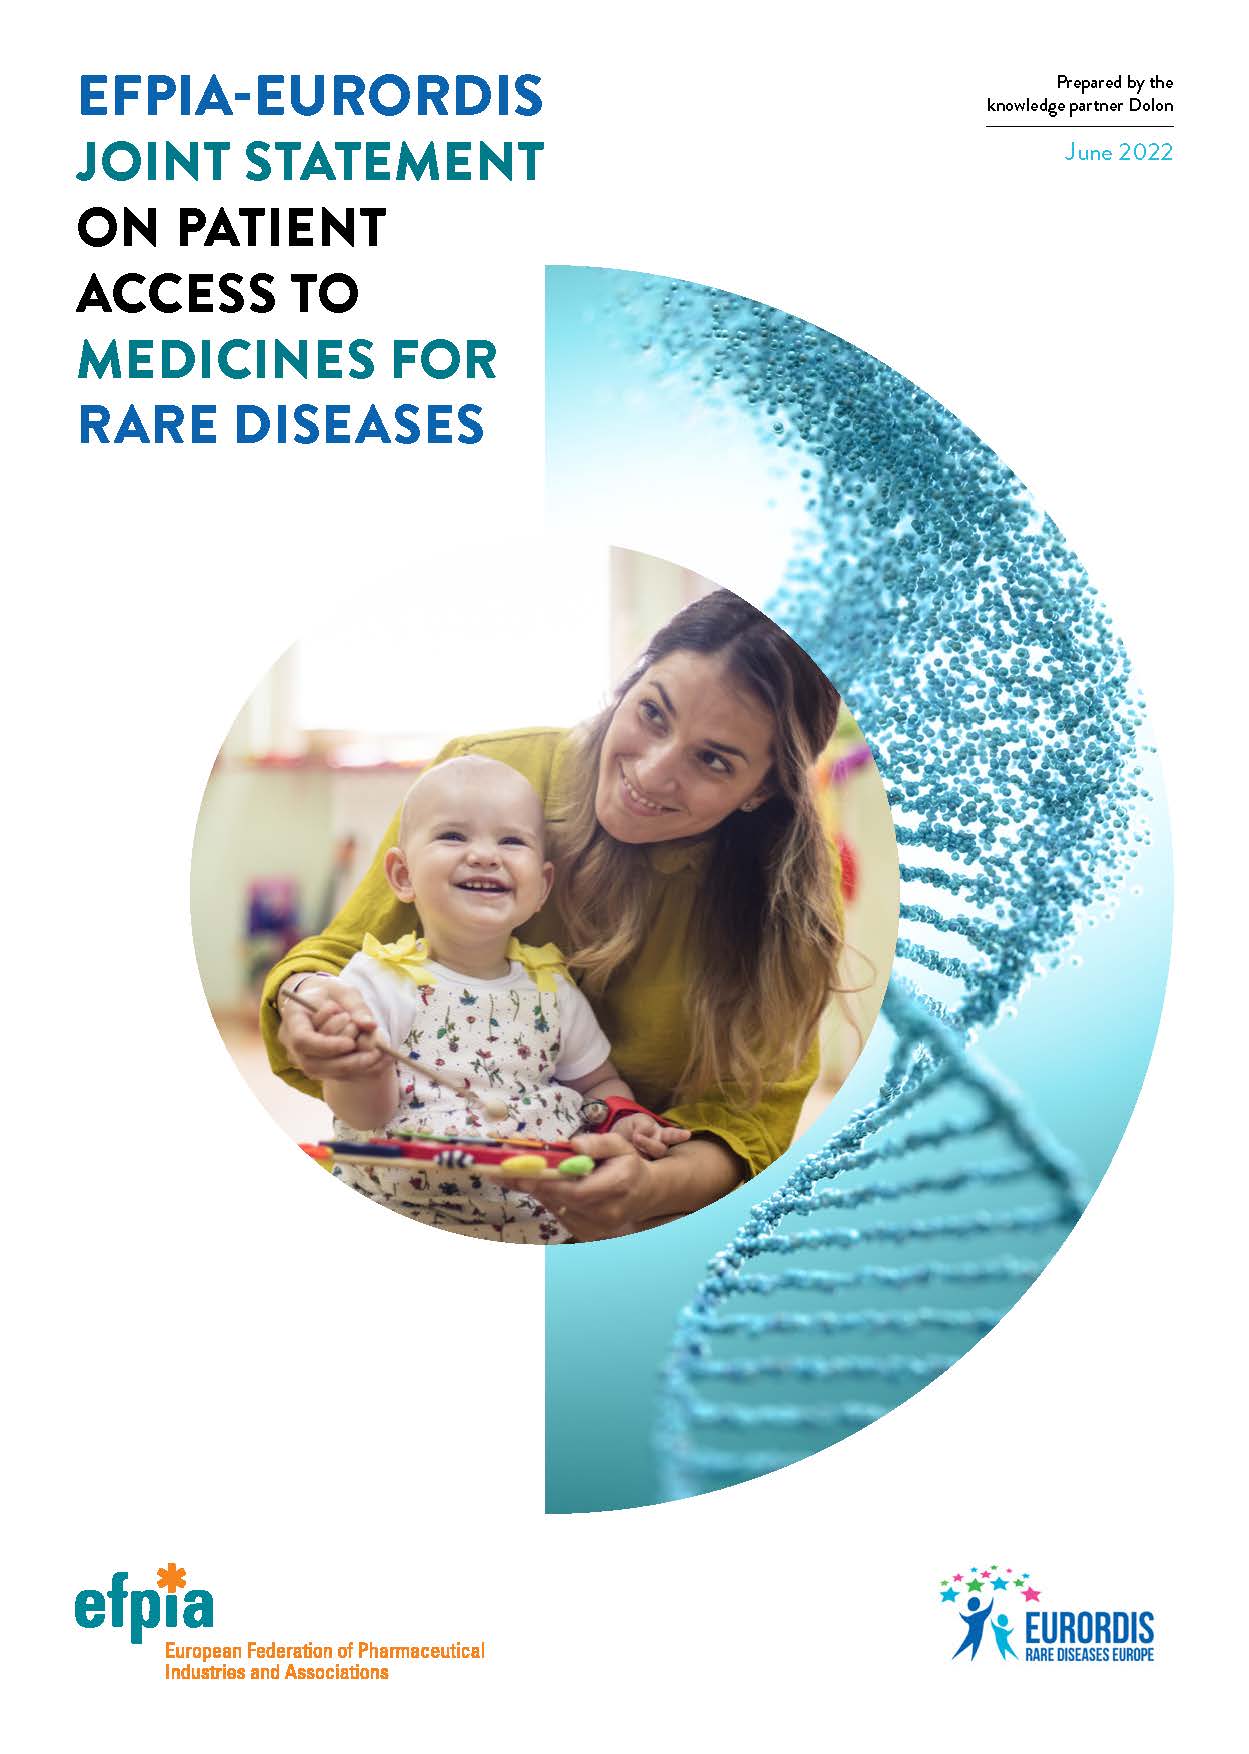 EFPIA-EURORDIS Joint Statement on Patient Access to Medicines for Rare Diseases